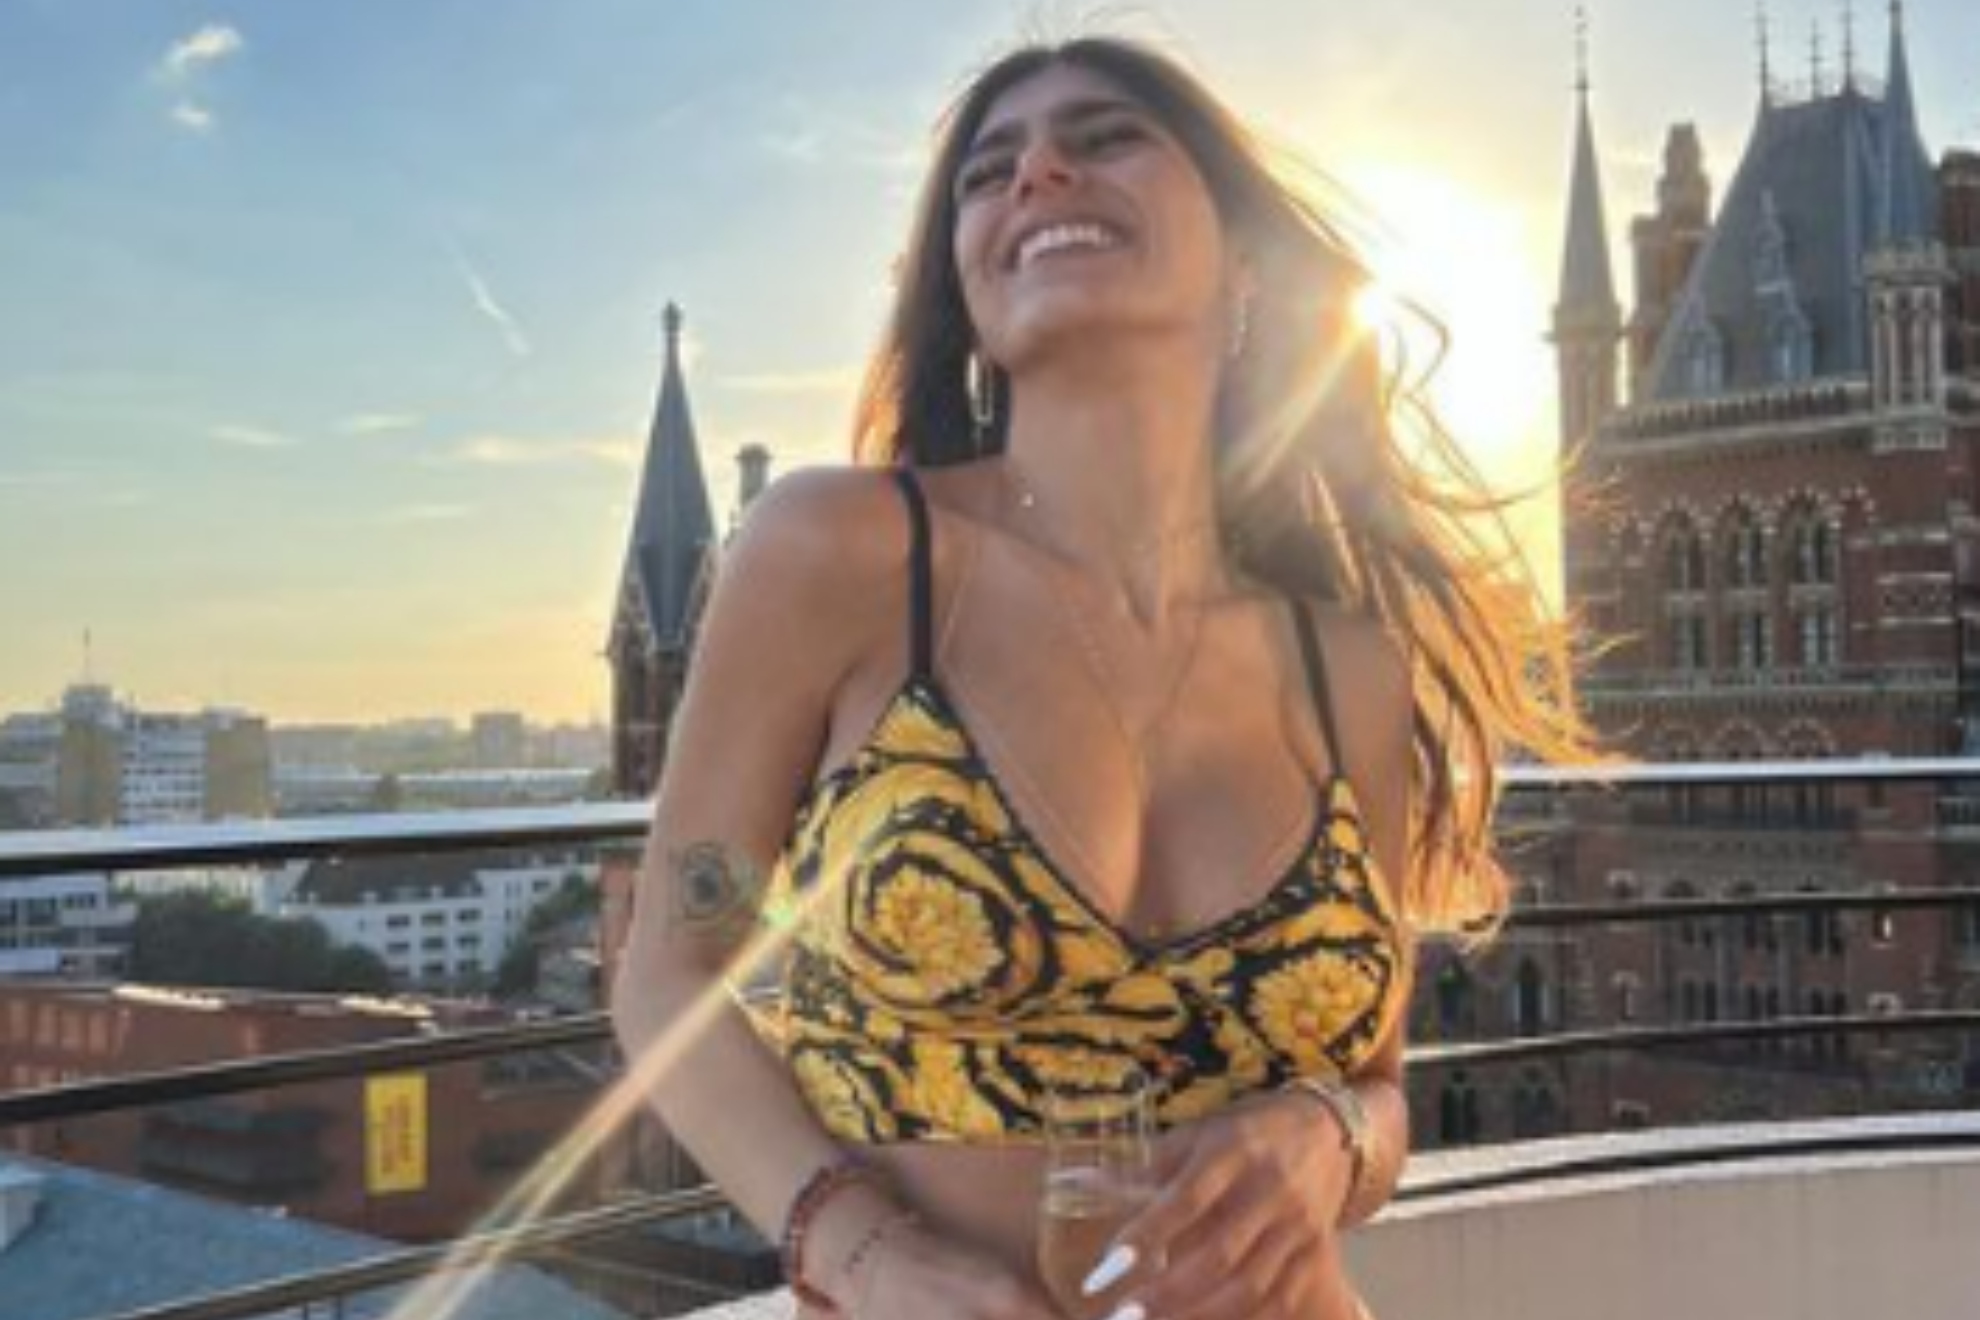 Mia Khalifa 2019 Sex Photo - How much did Mia Khalifa earn in her active years as a porn actress? | Marca